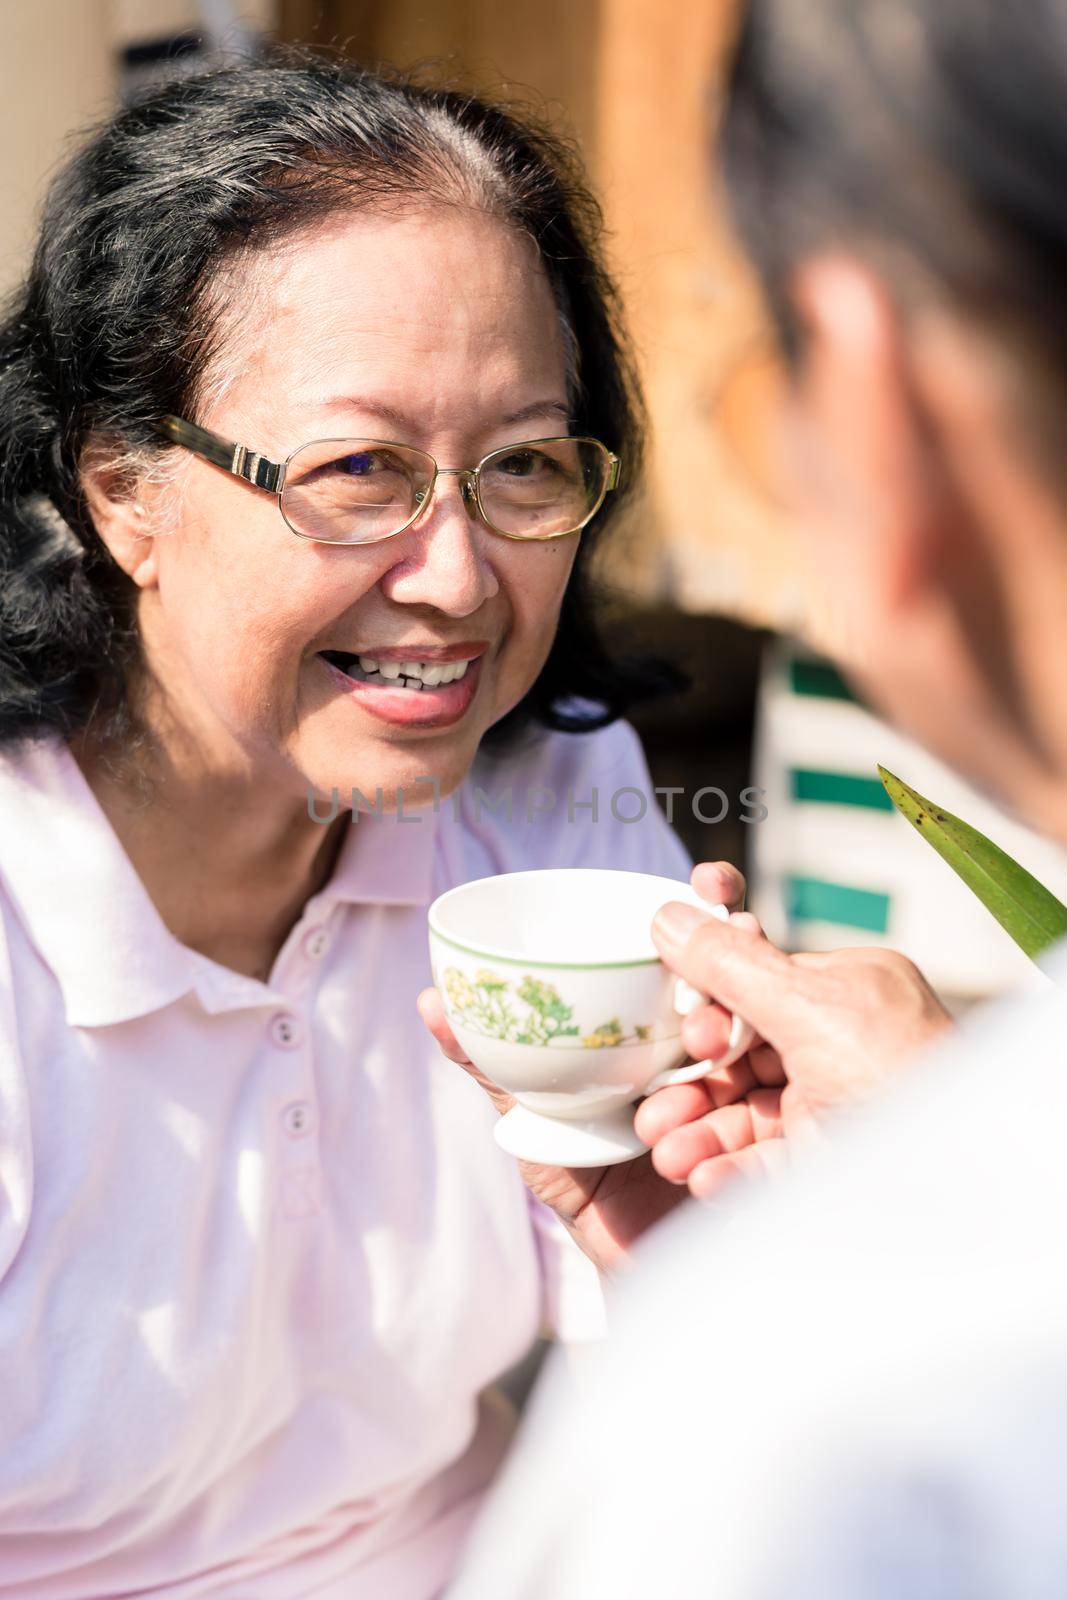 Smiling woman taking coffee cup from her husband